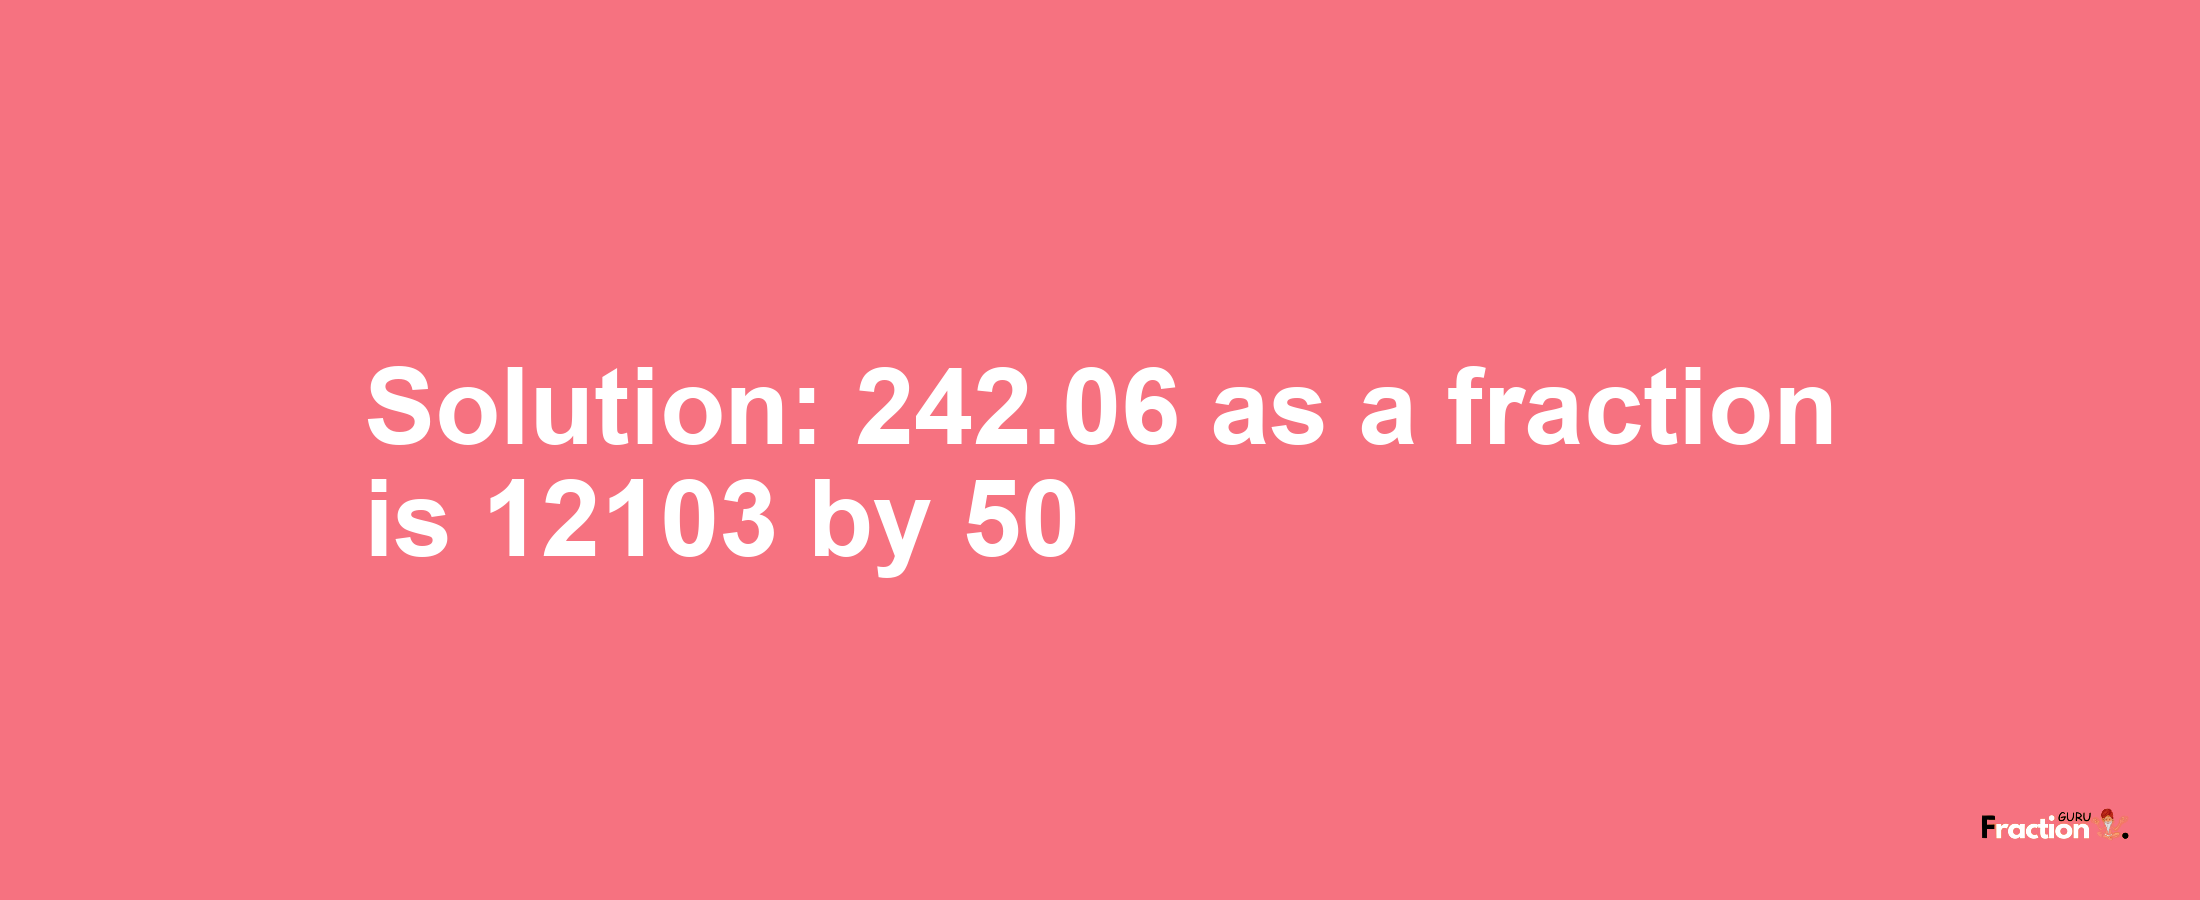 Solution:242.06 as a fraction is 12103/50